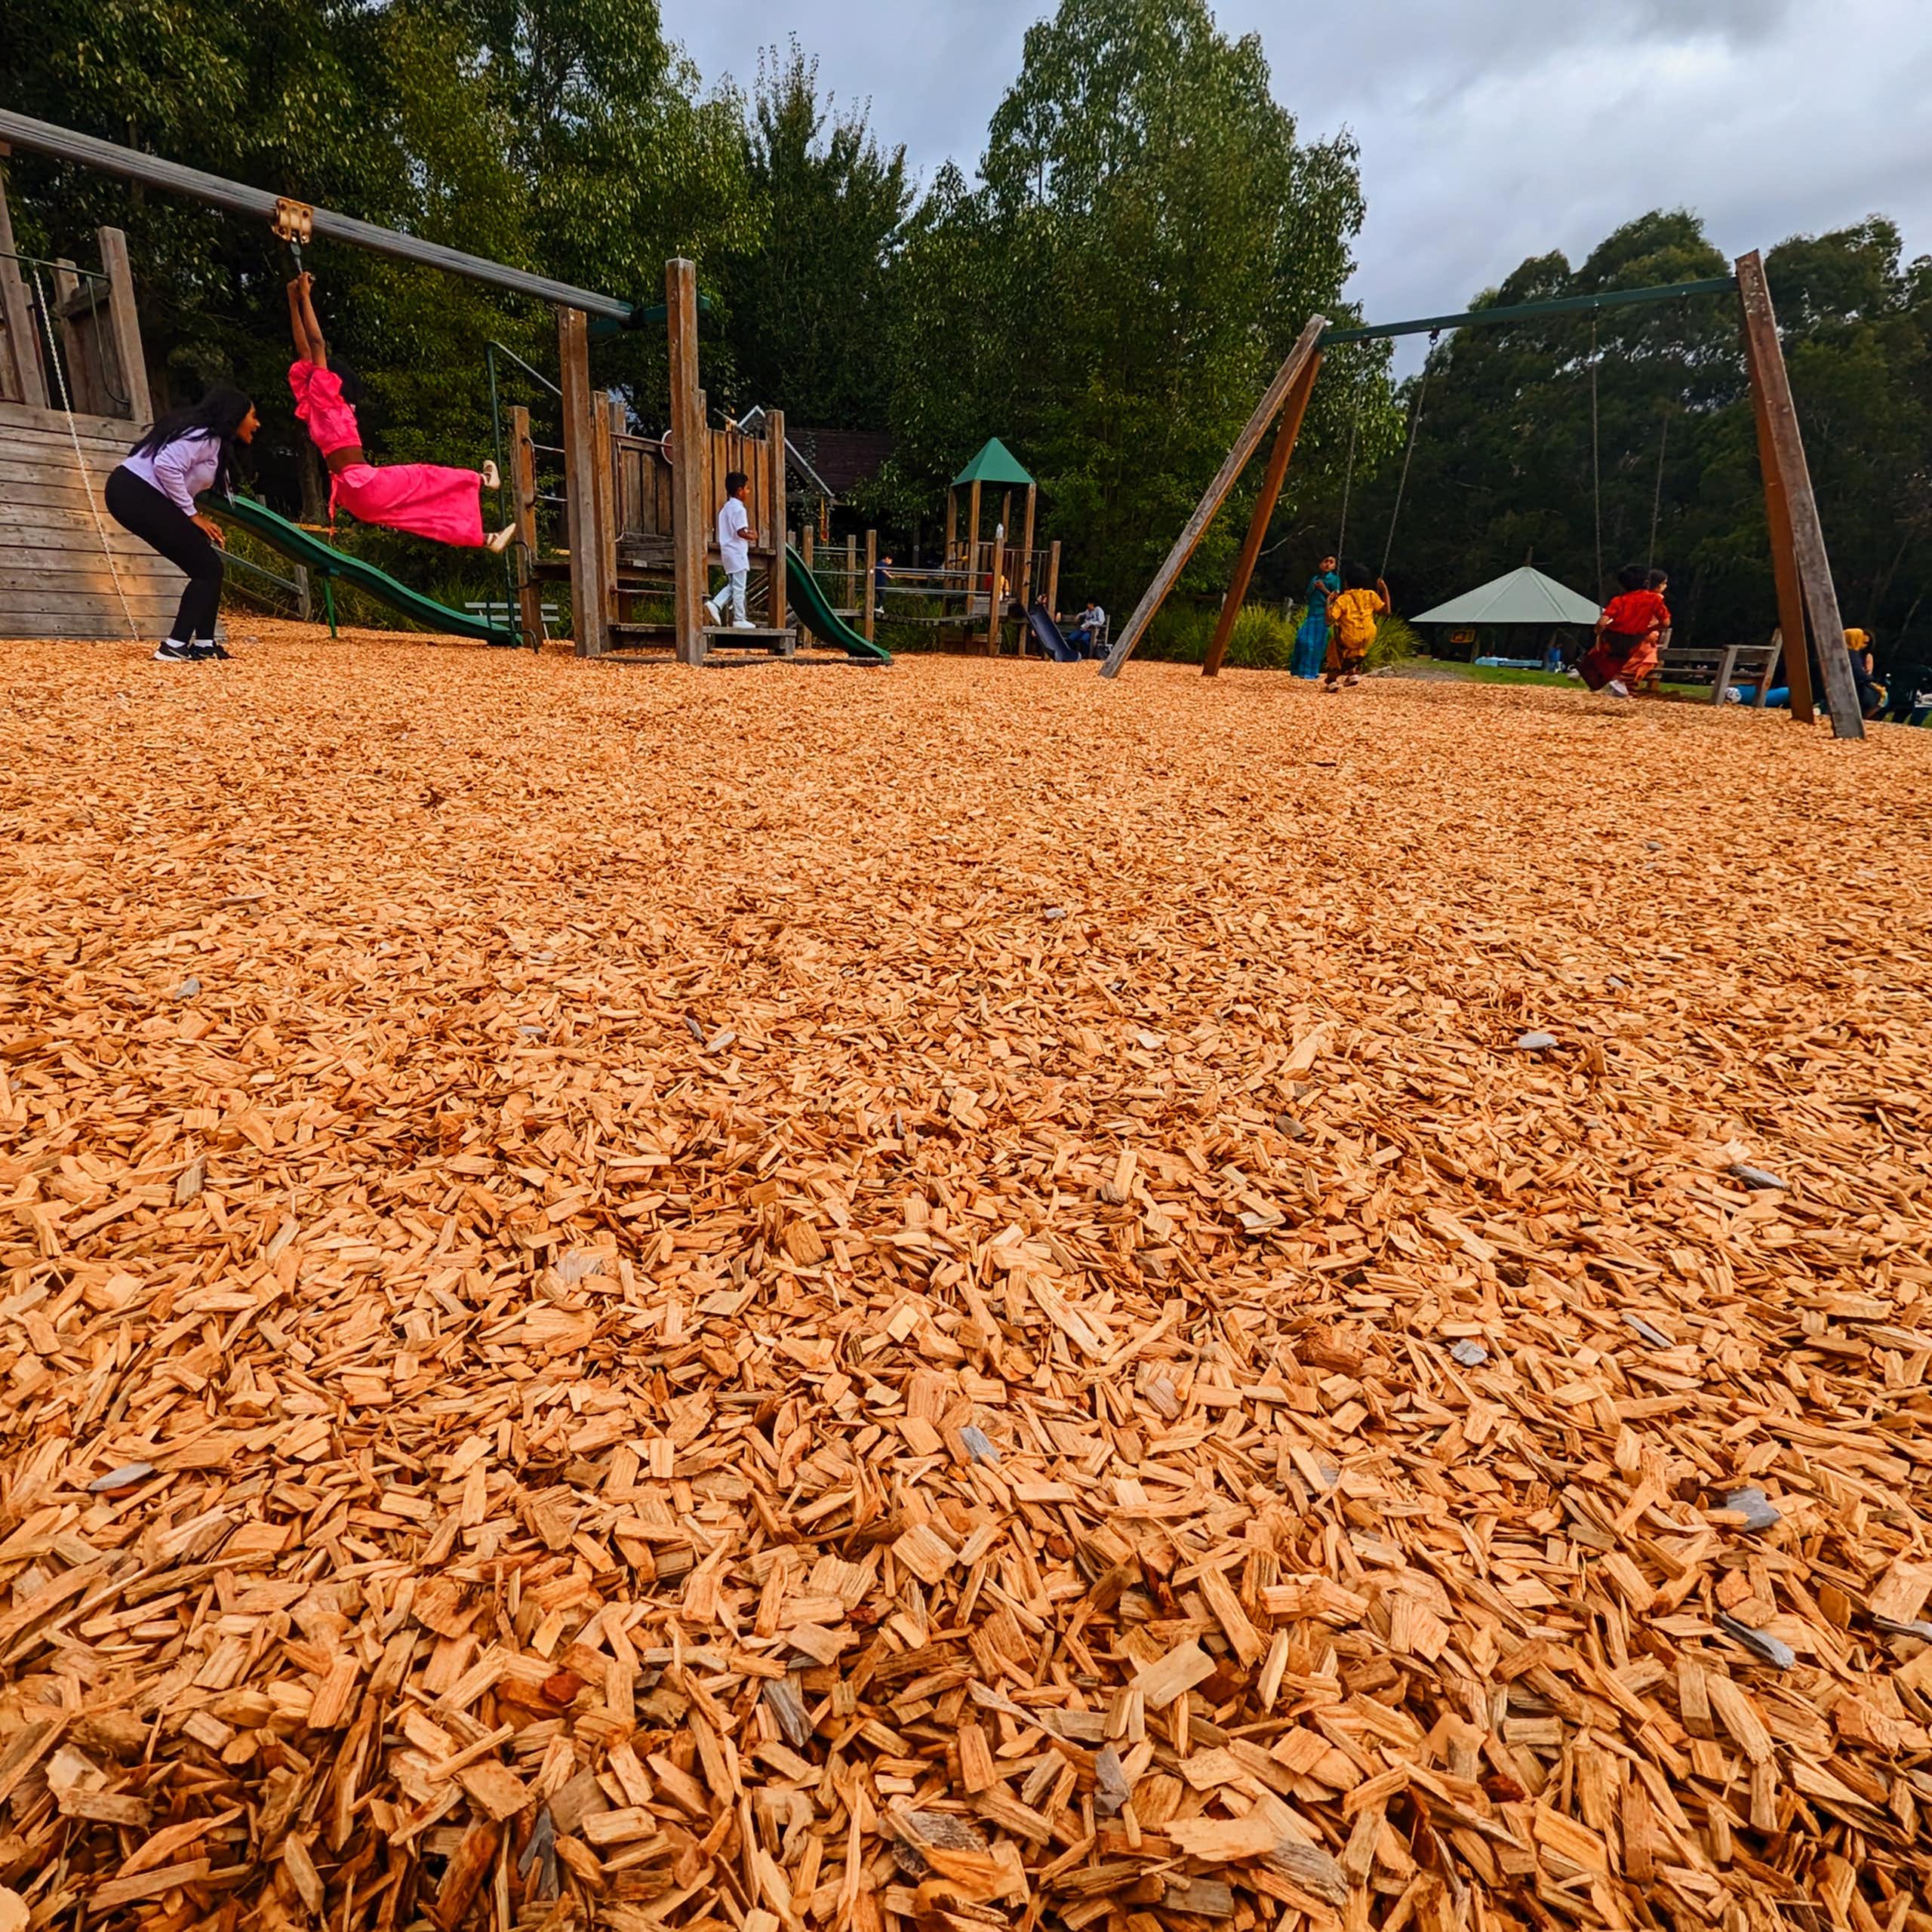 Asbestos in playground mulch: how to avoid a repeat of this circular economy scandal